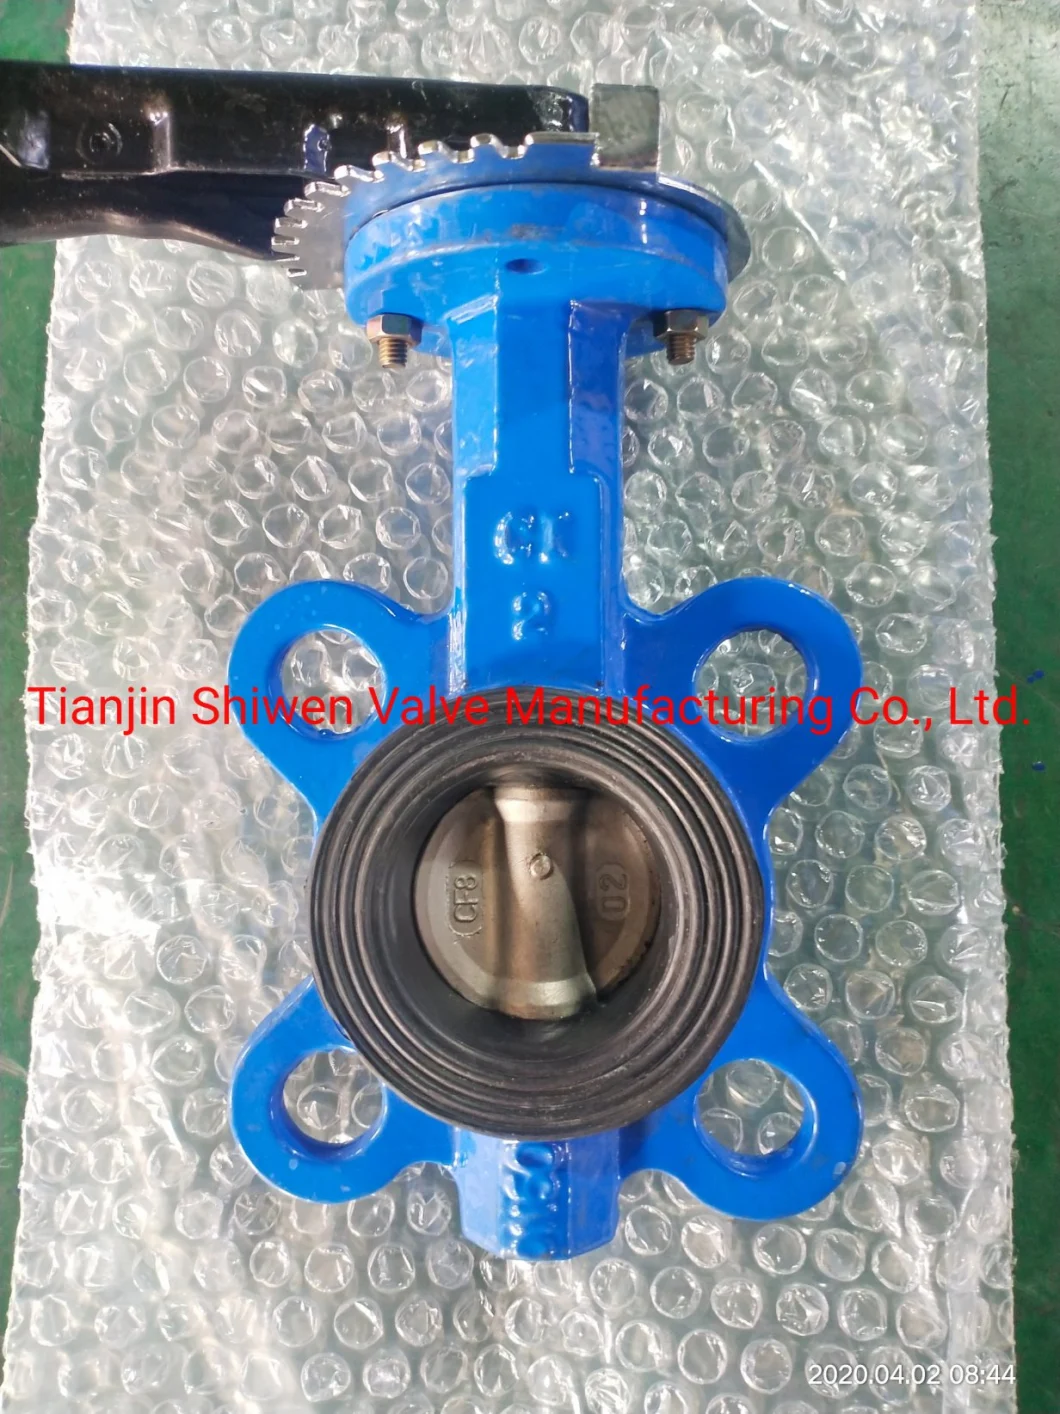 Cast Iron/Ductile Iron Wafer Butterfly Valve with EPDM Lined